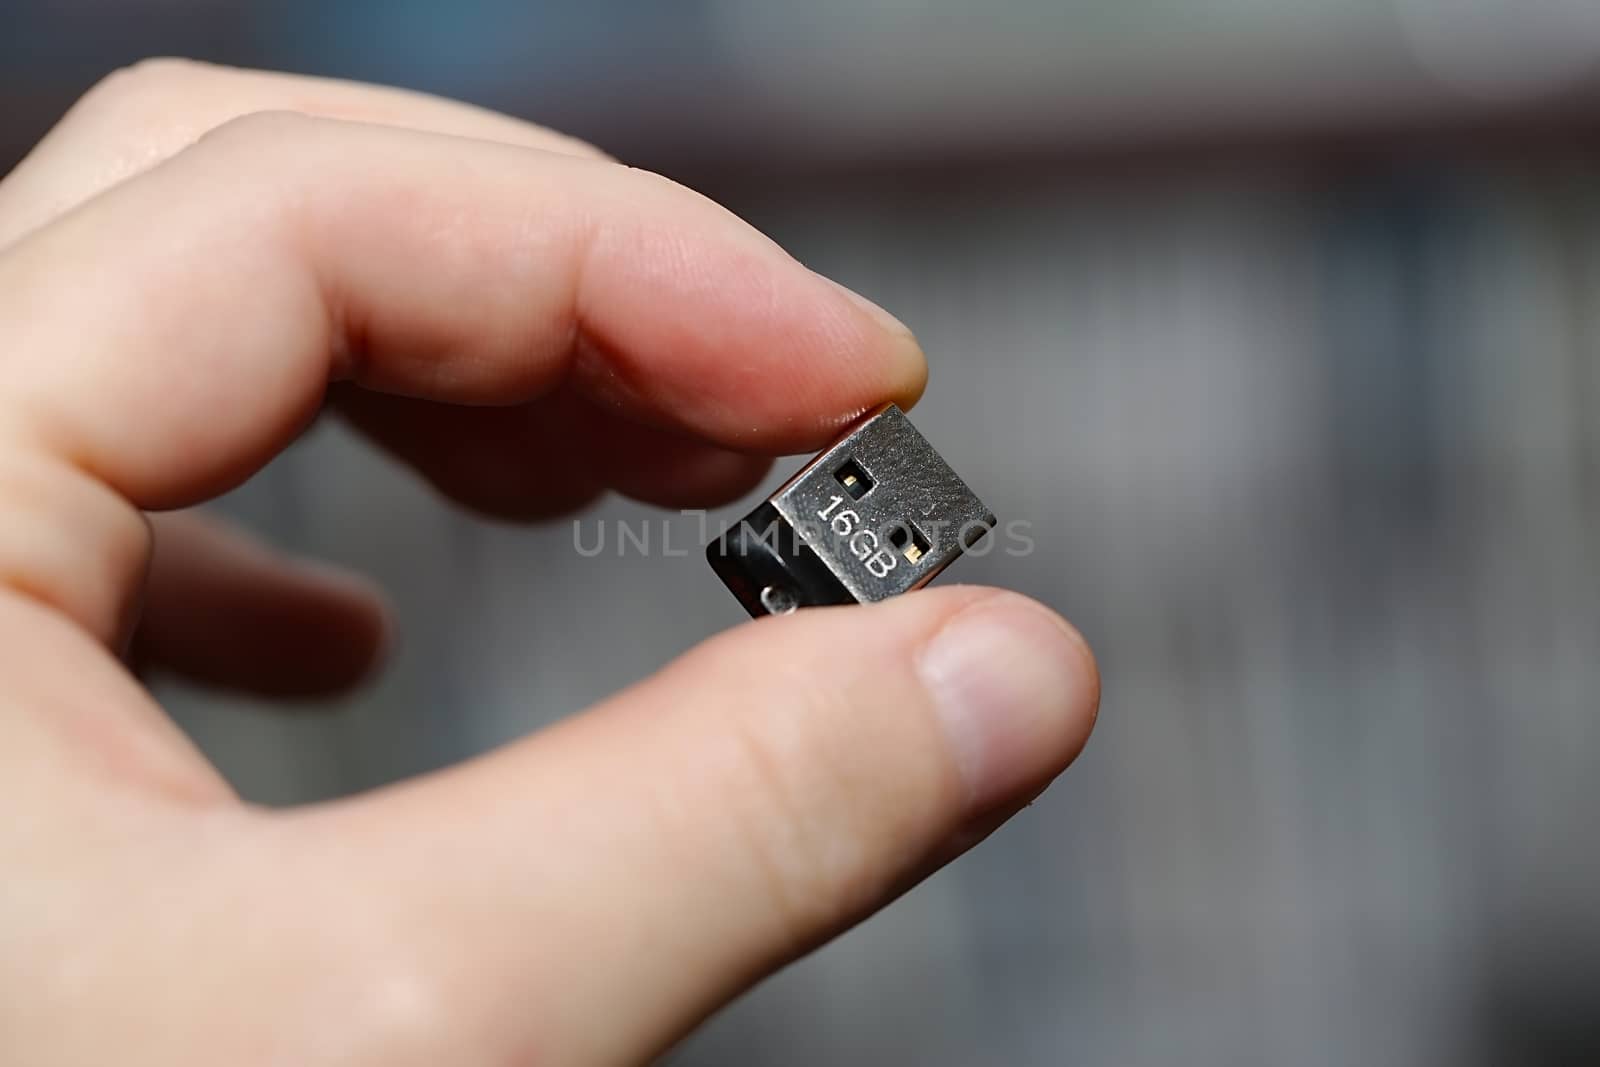 Tiny USB drive being held